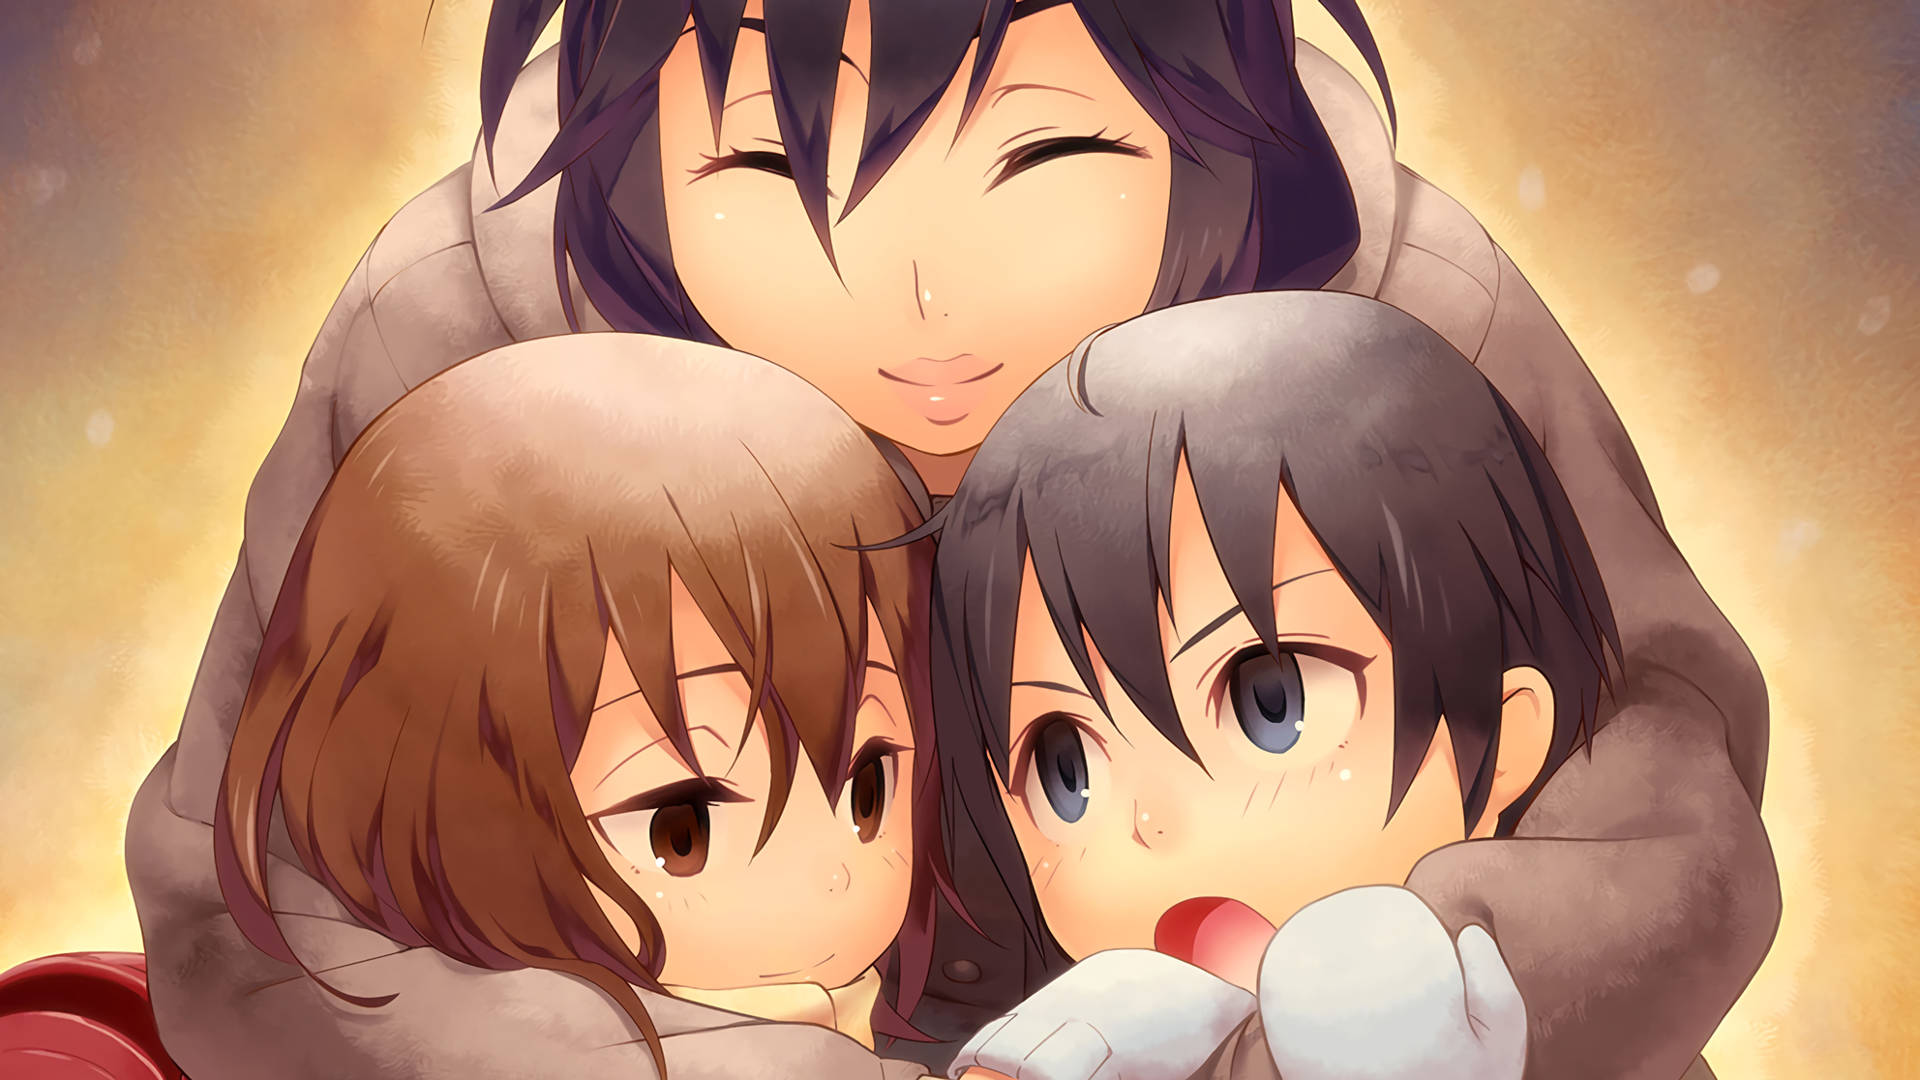 Family Picture Of Erased Characters